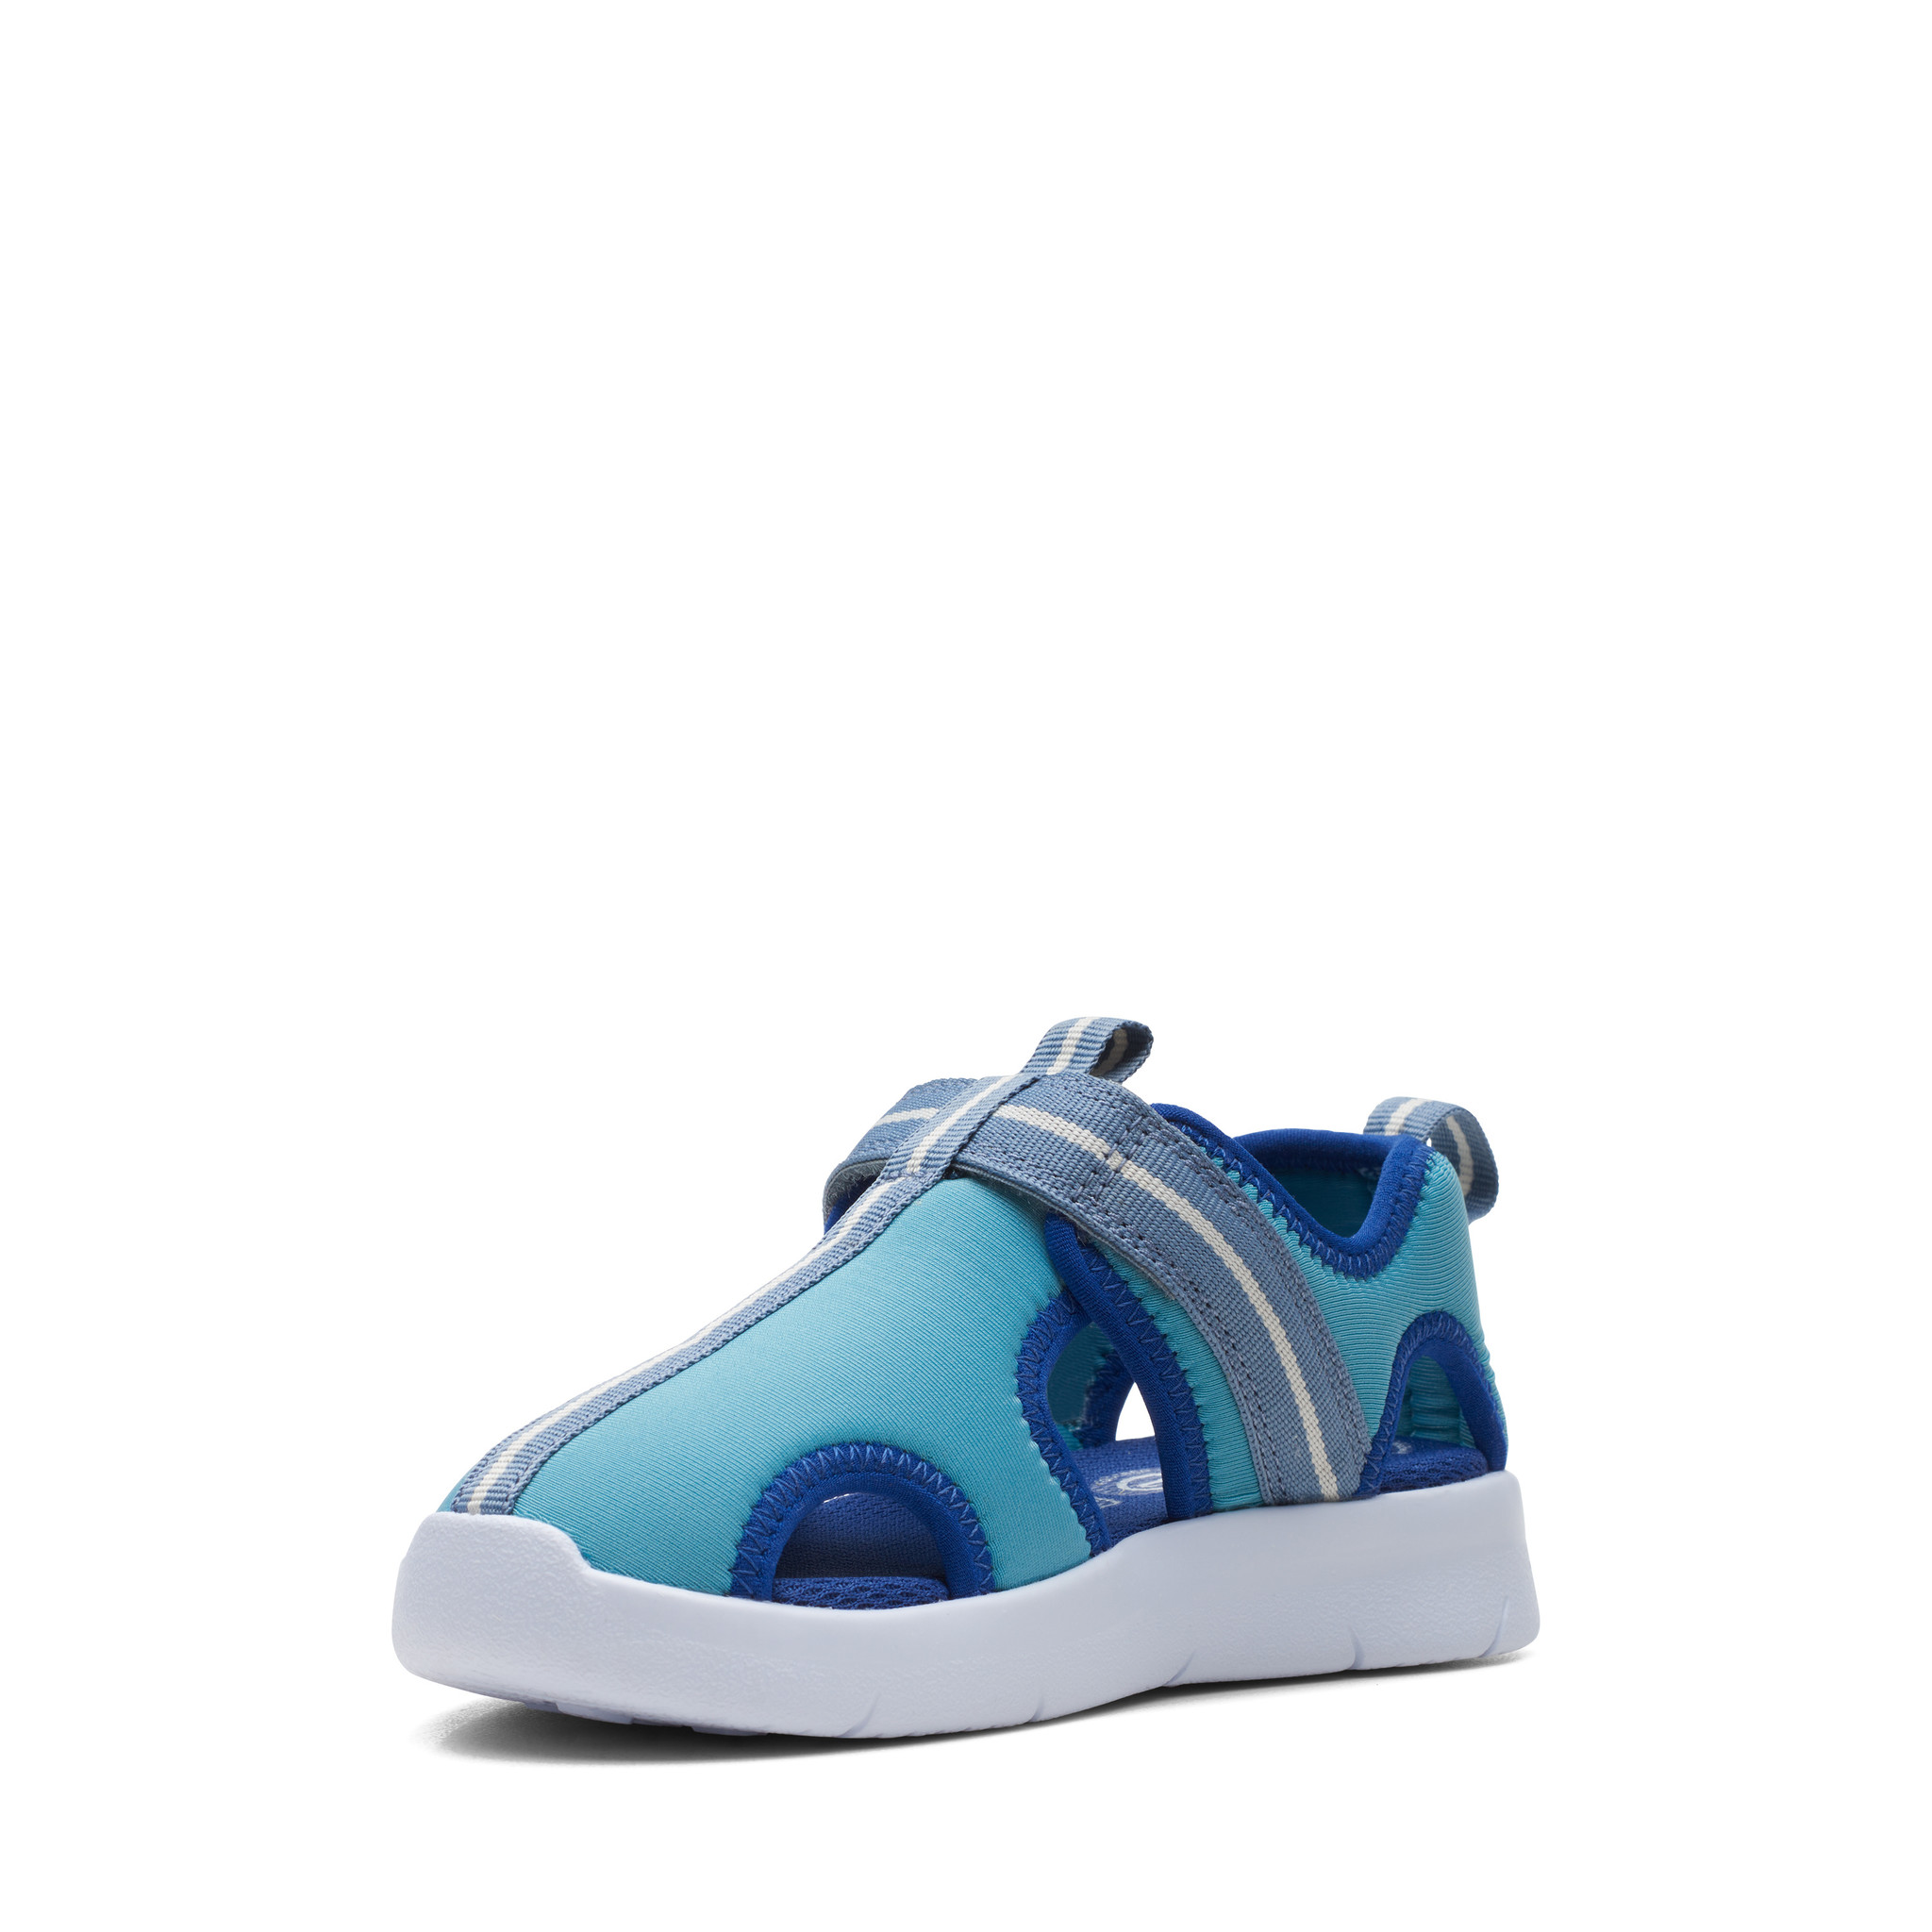 Clarks Ath Water Blue Combi Infant